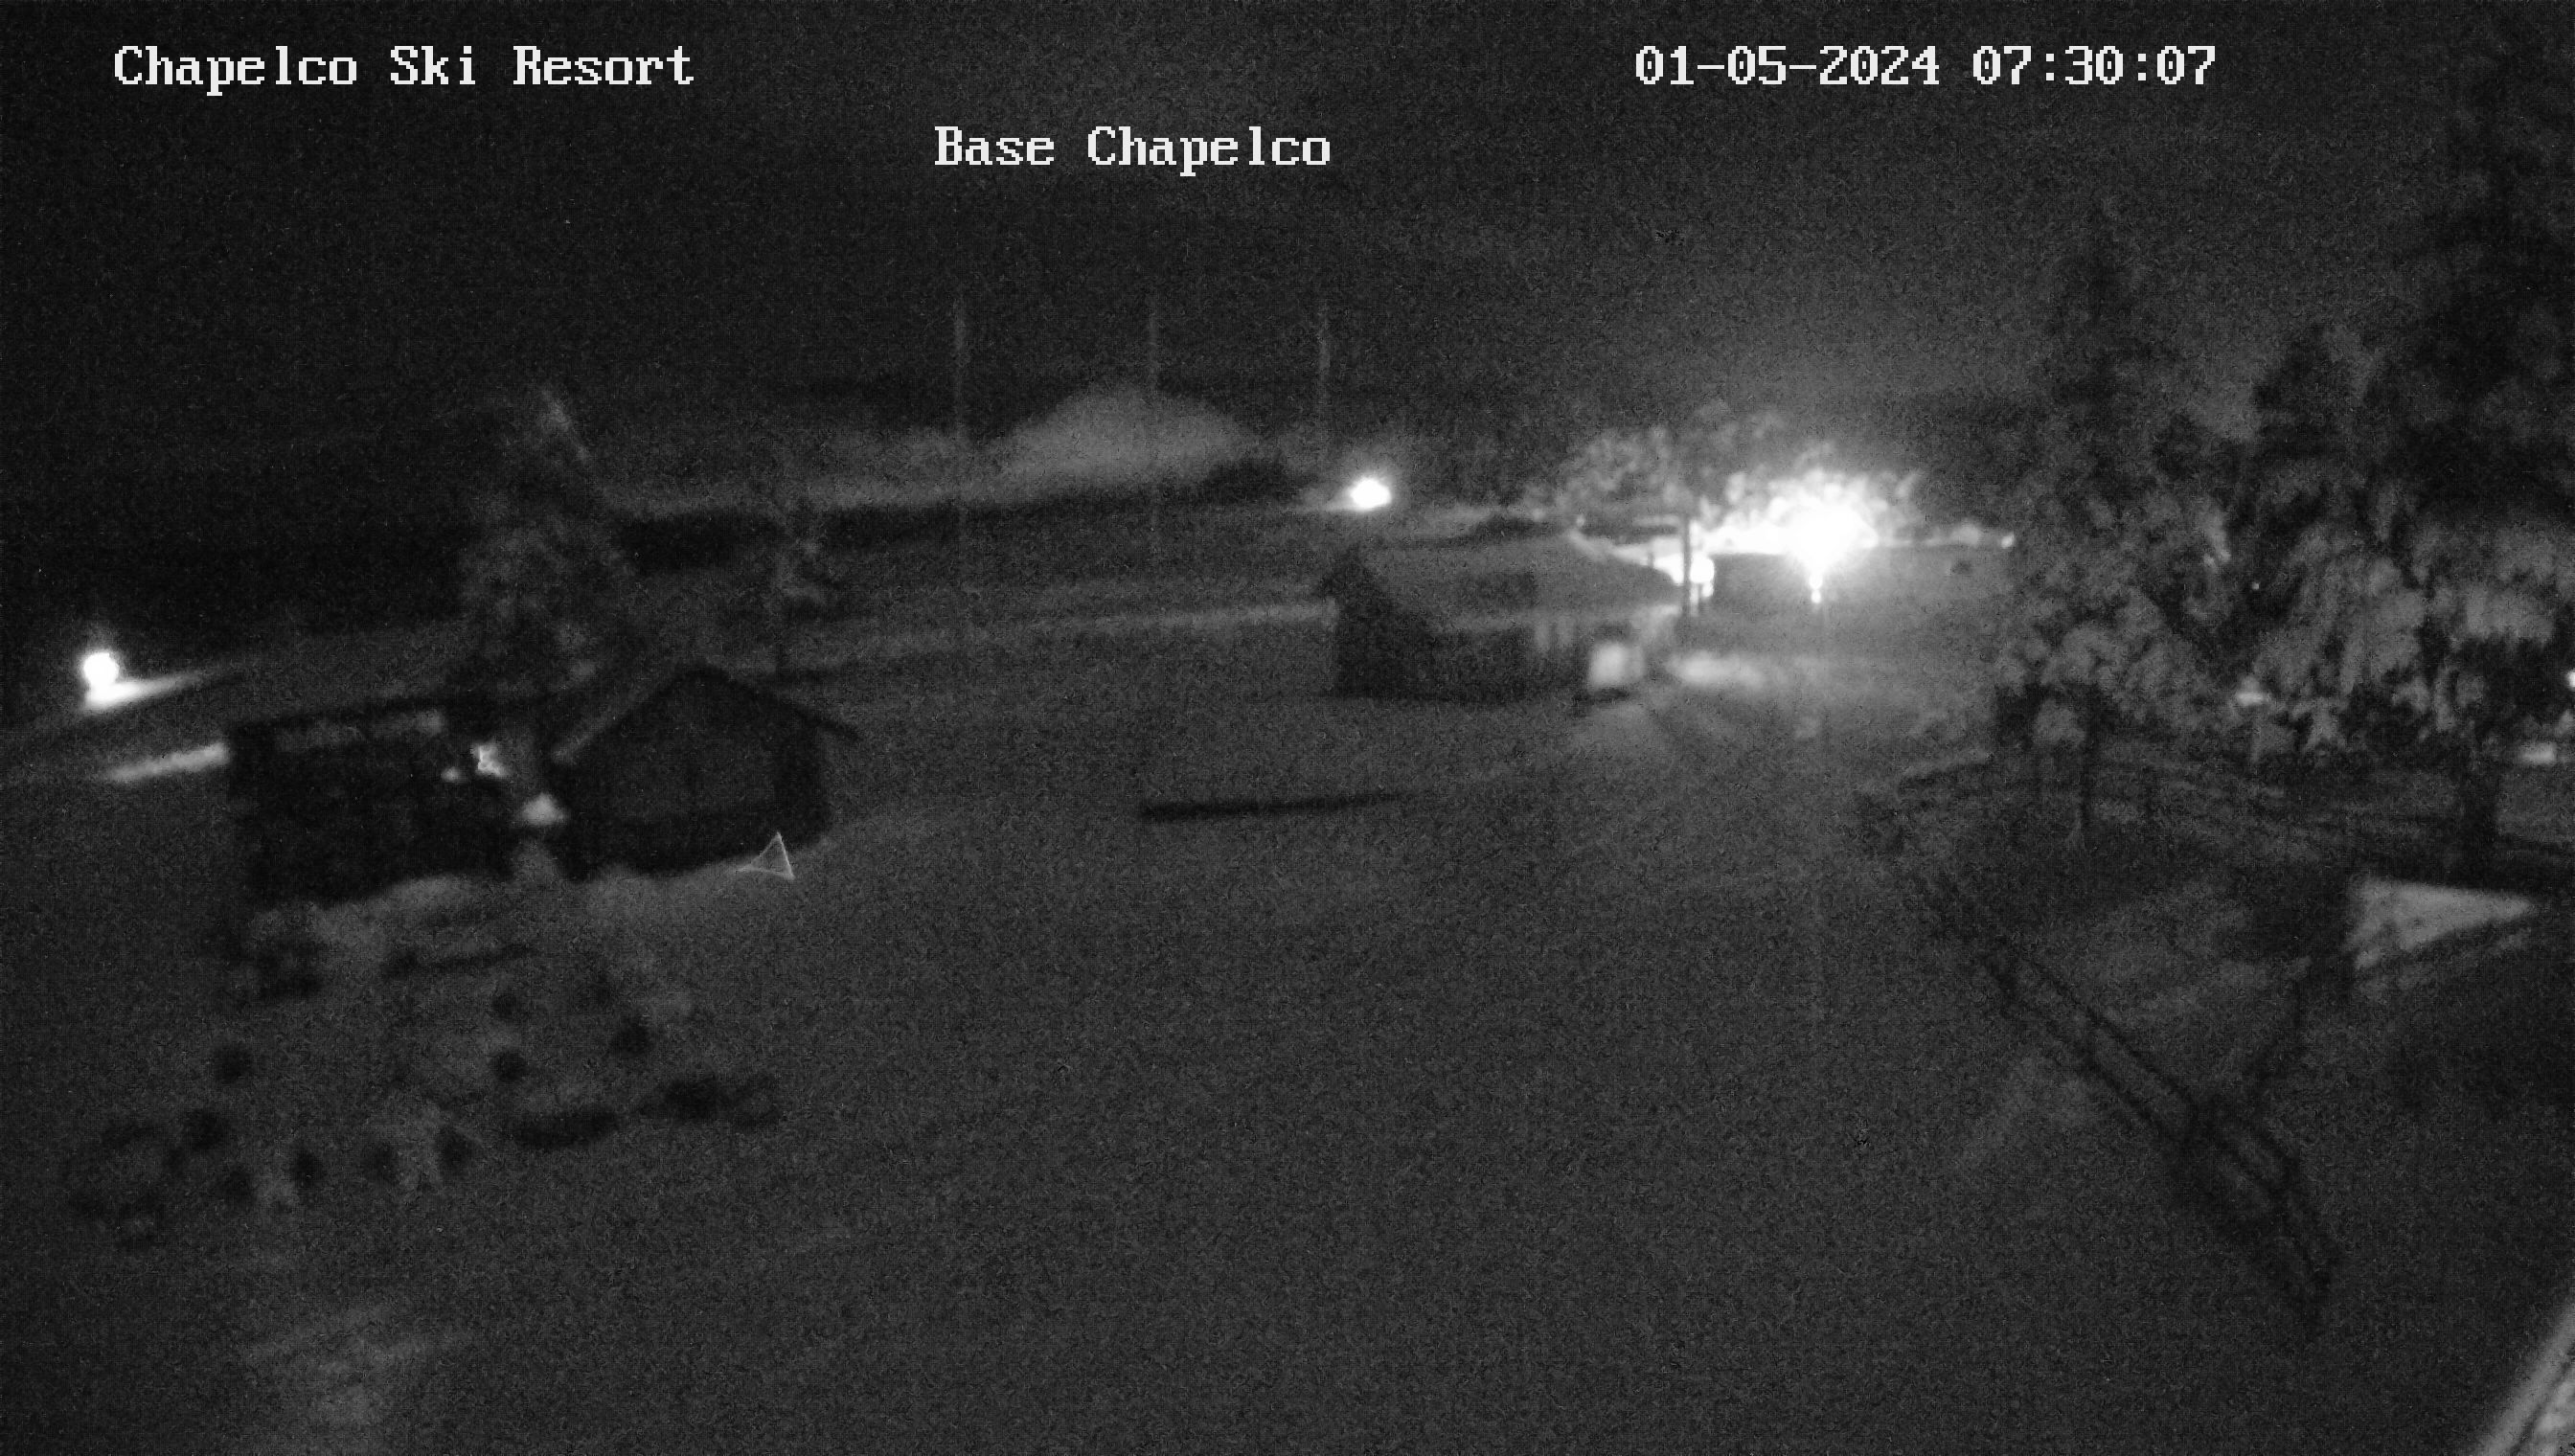 Base of the hill, West side administrative office building | Chapelco cams